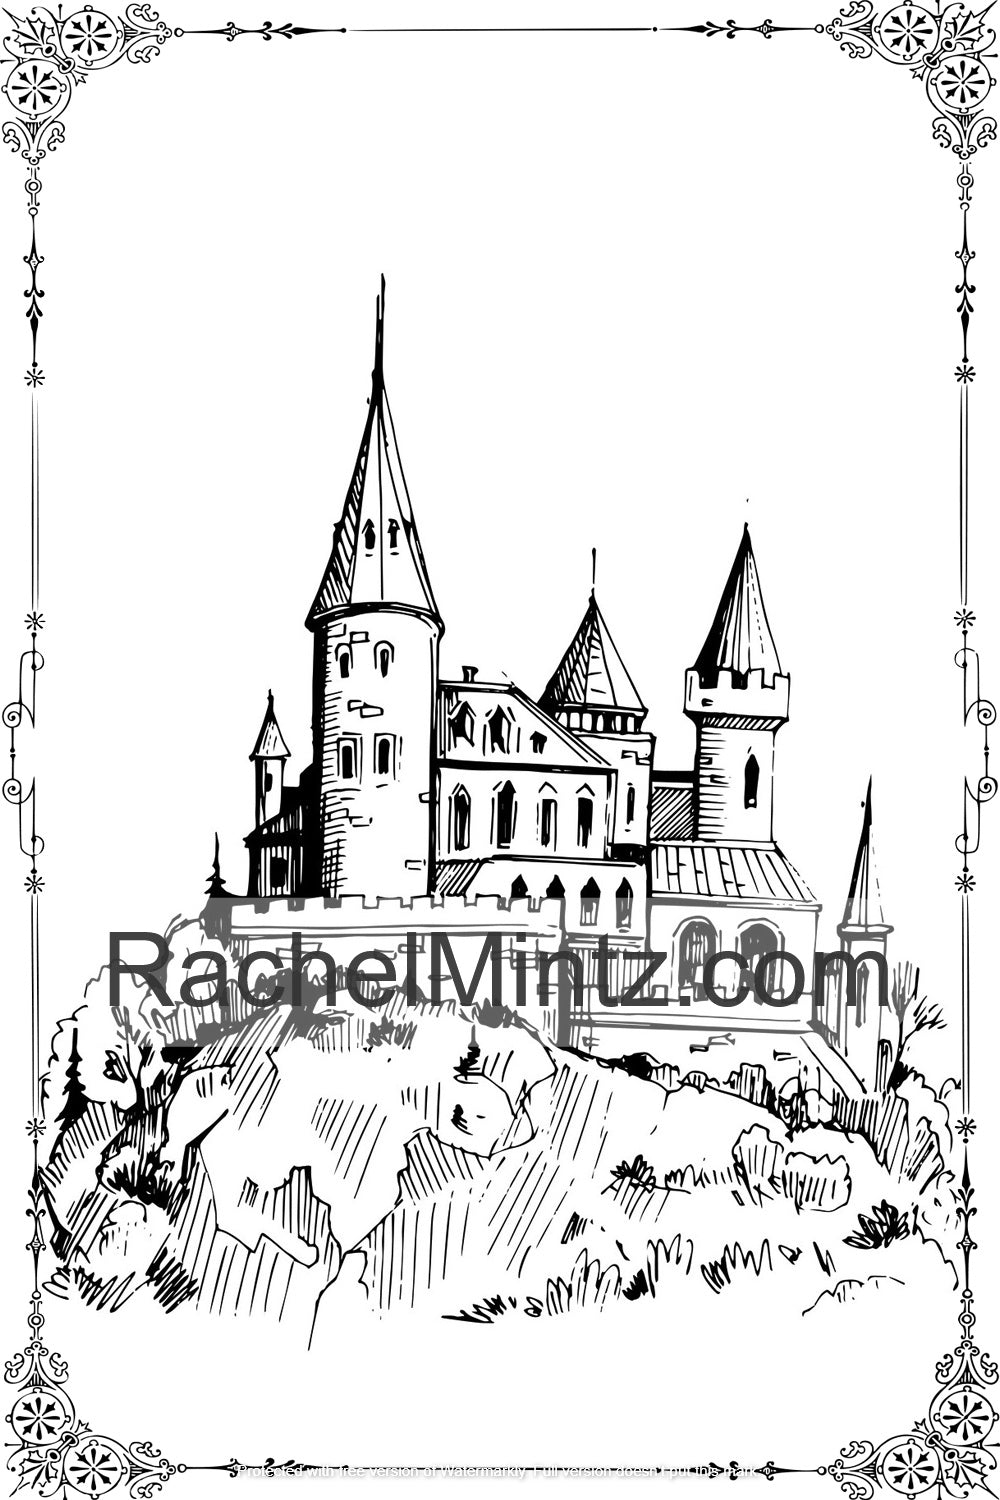 Castles & Fortresses - Grayscale Sketches, Gothic Architecture, Fairy Tale Castles, Medieval Palaces - Printable Coloring Book